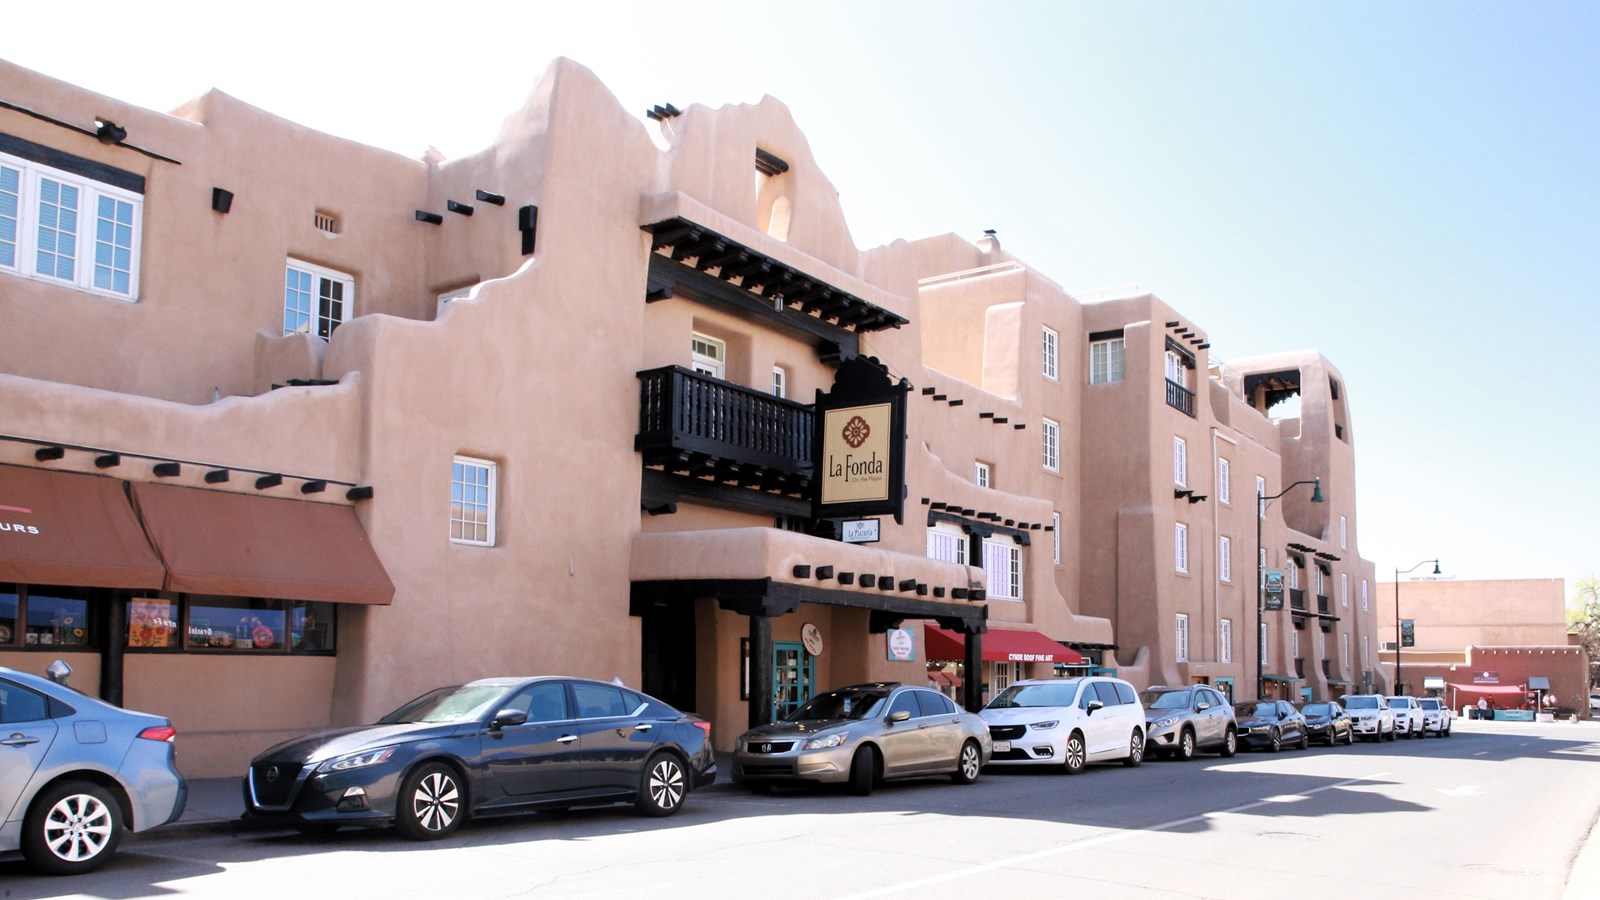 A large, two-story, pink adobe building, on a city street lined with cars.